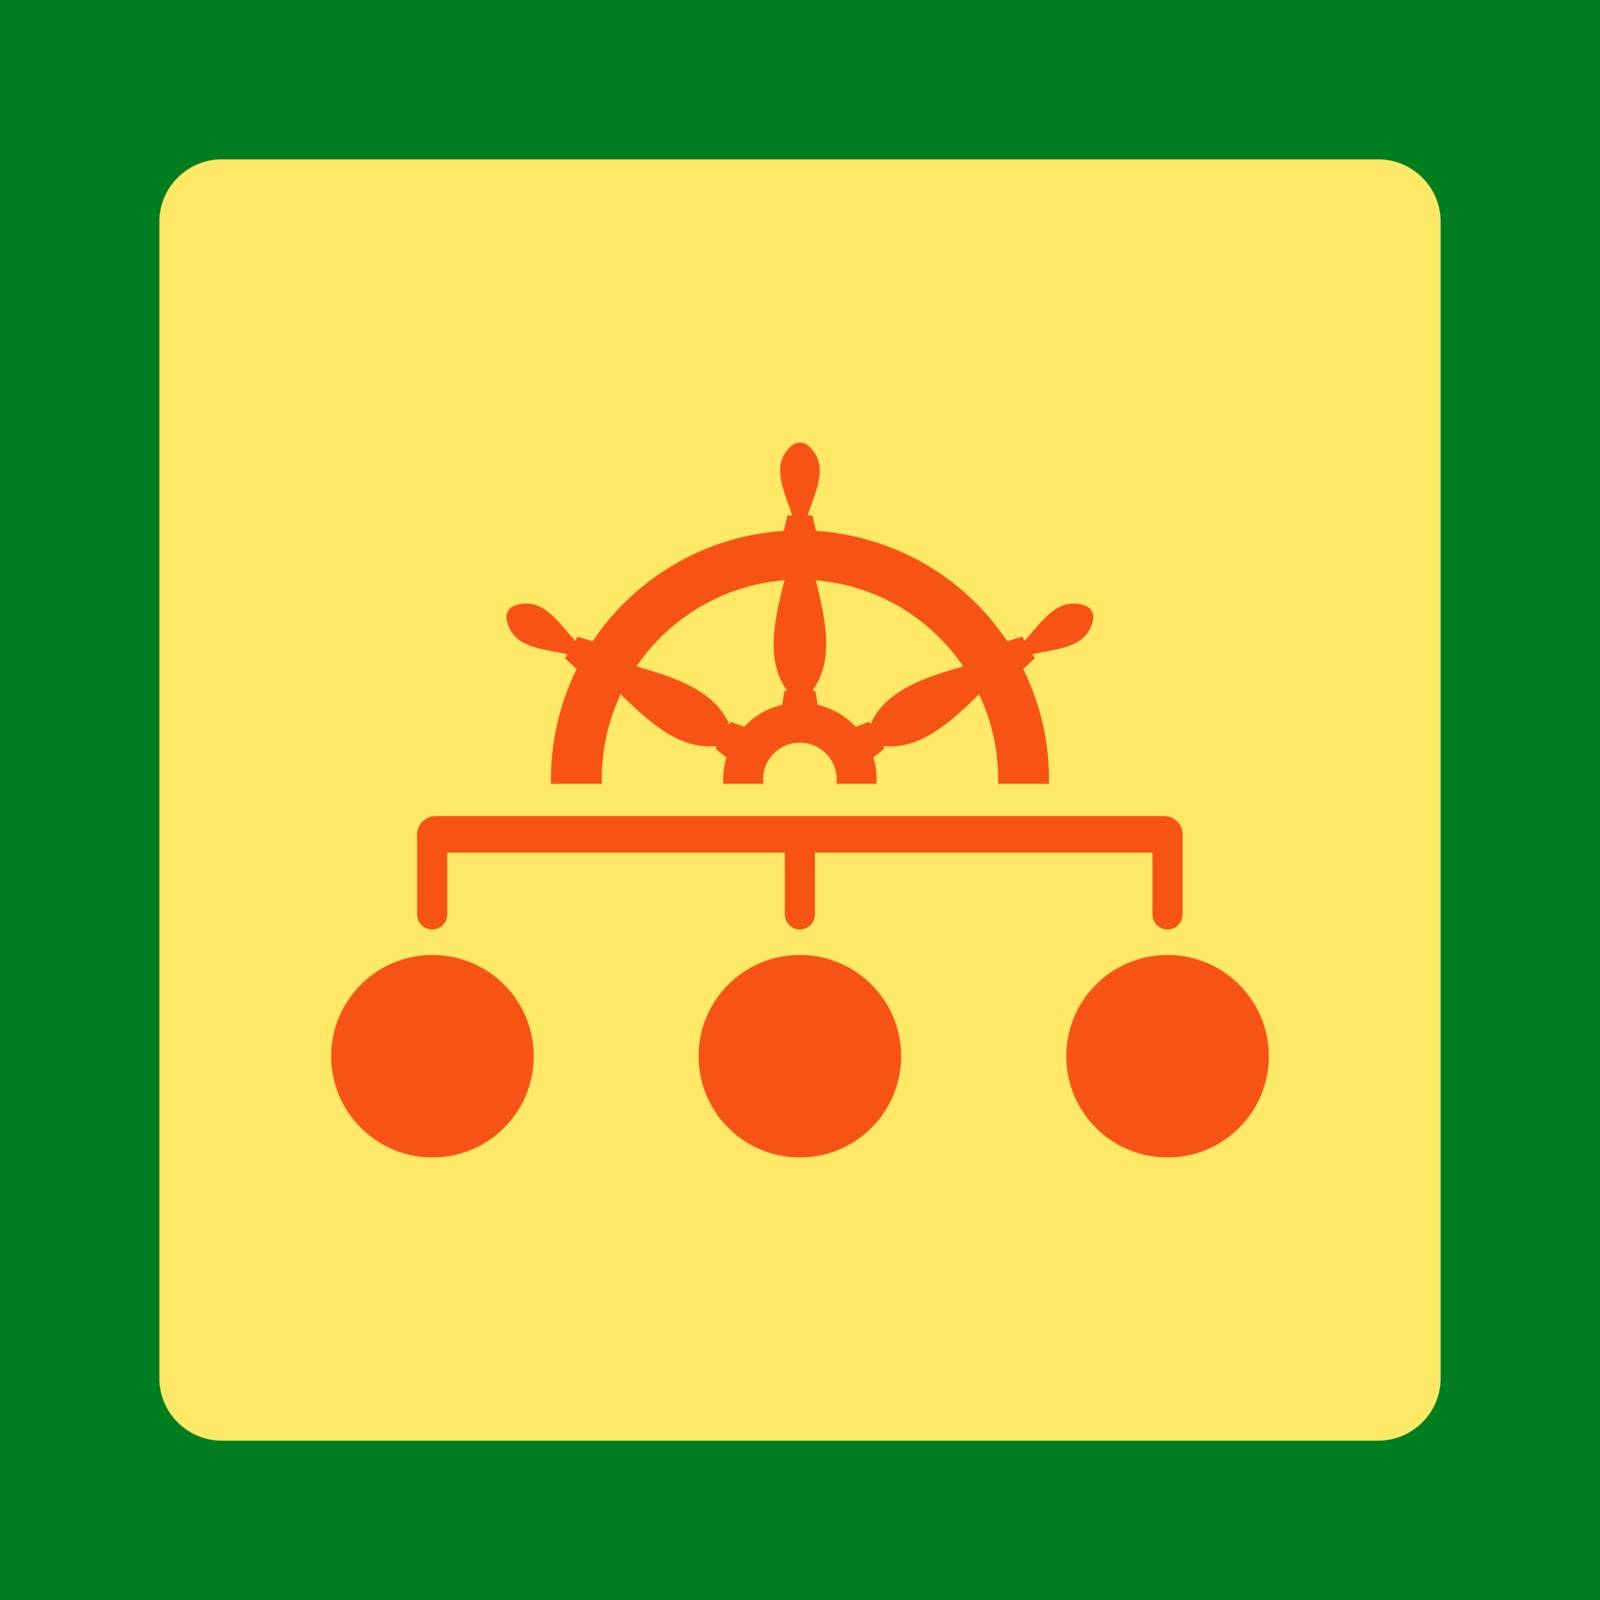 Rule icon. Vector style is orange and yellow colors, flat rounded square button on a green background.